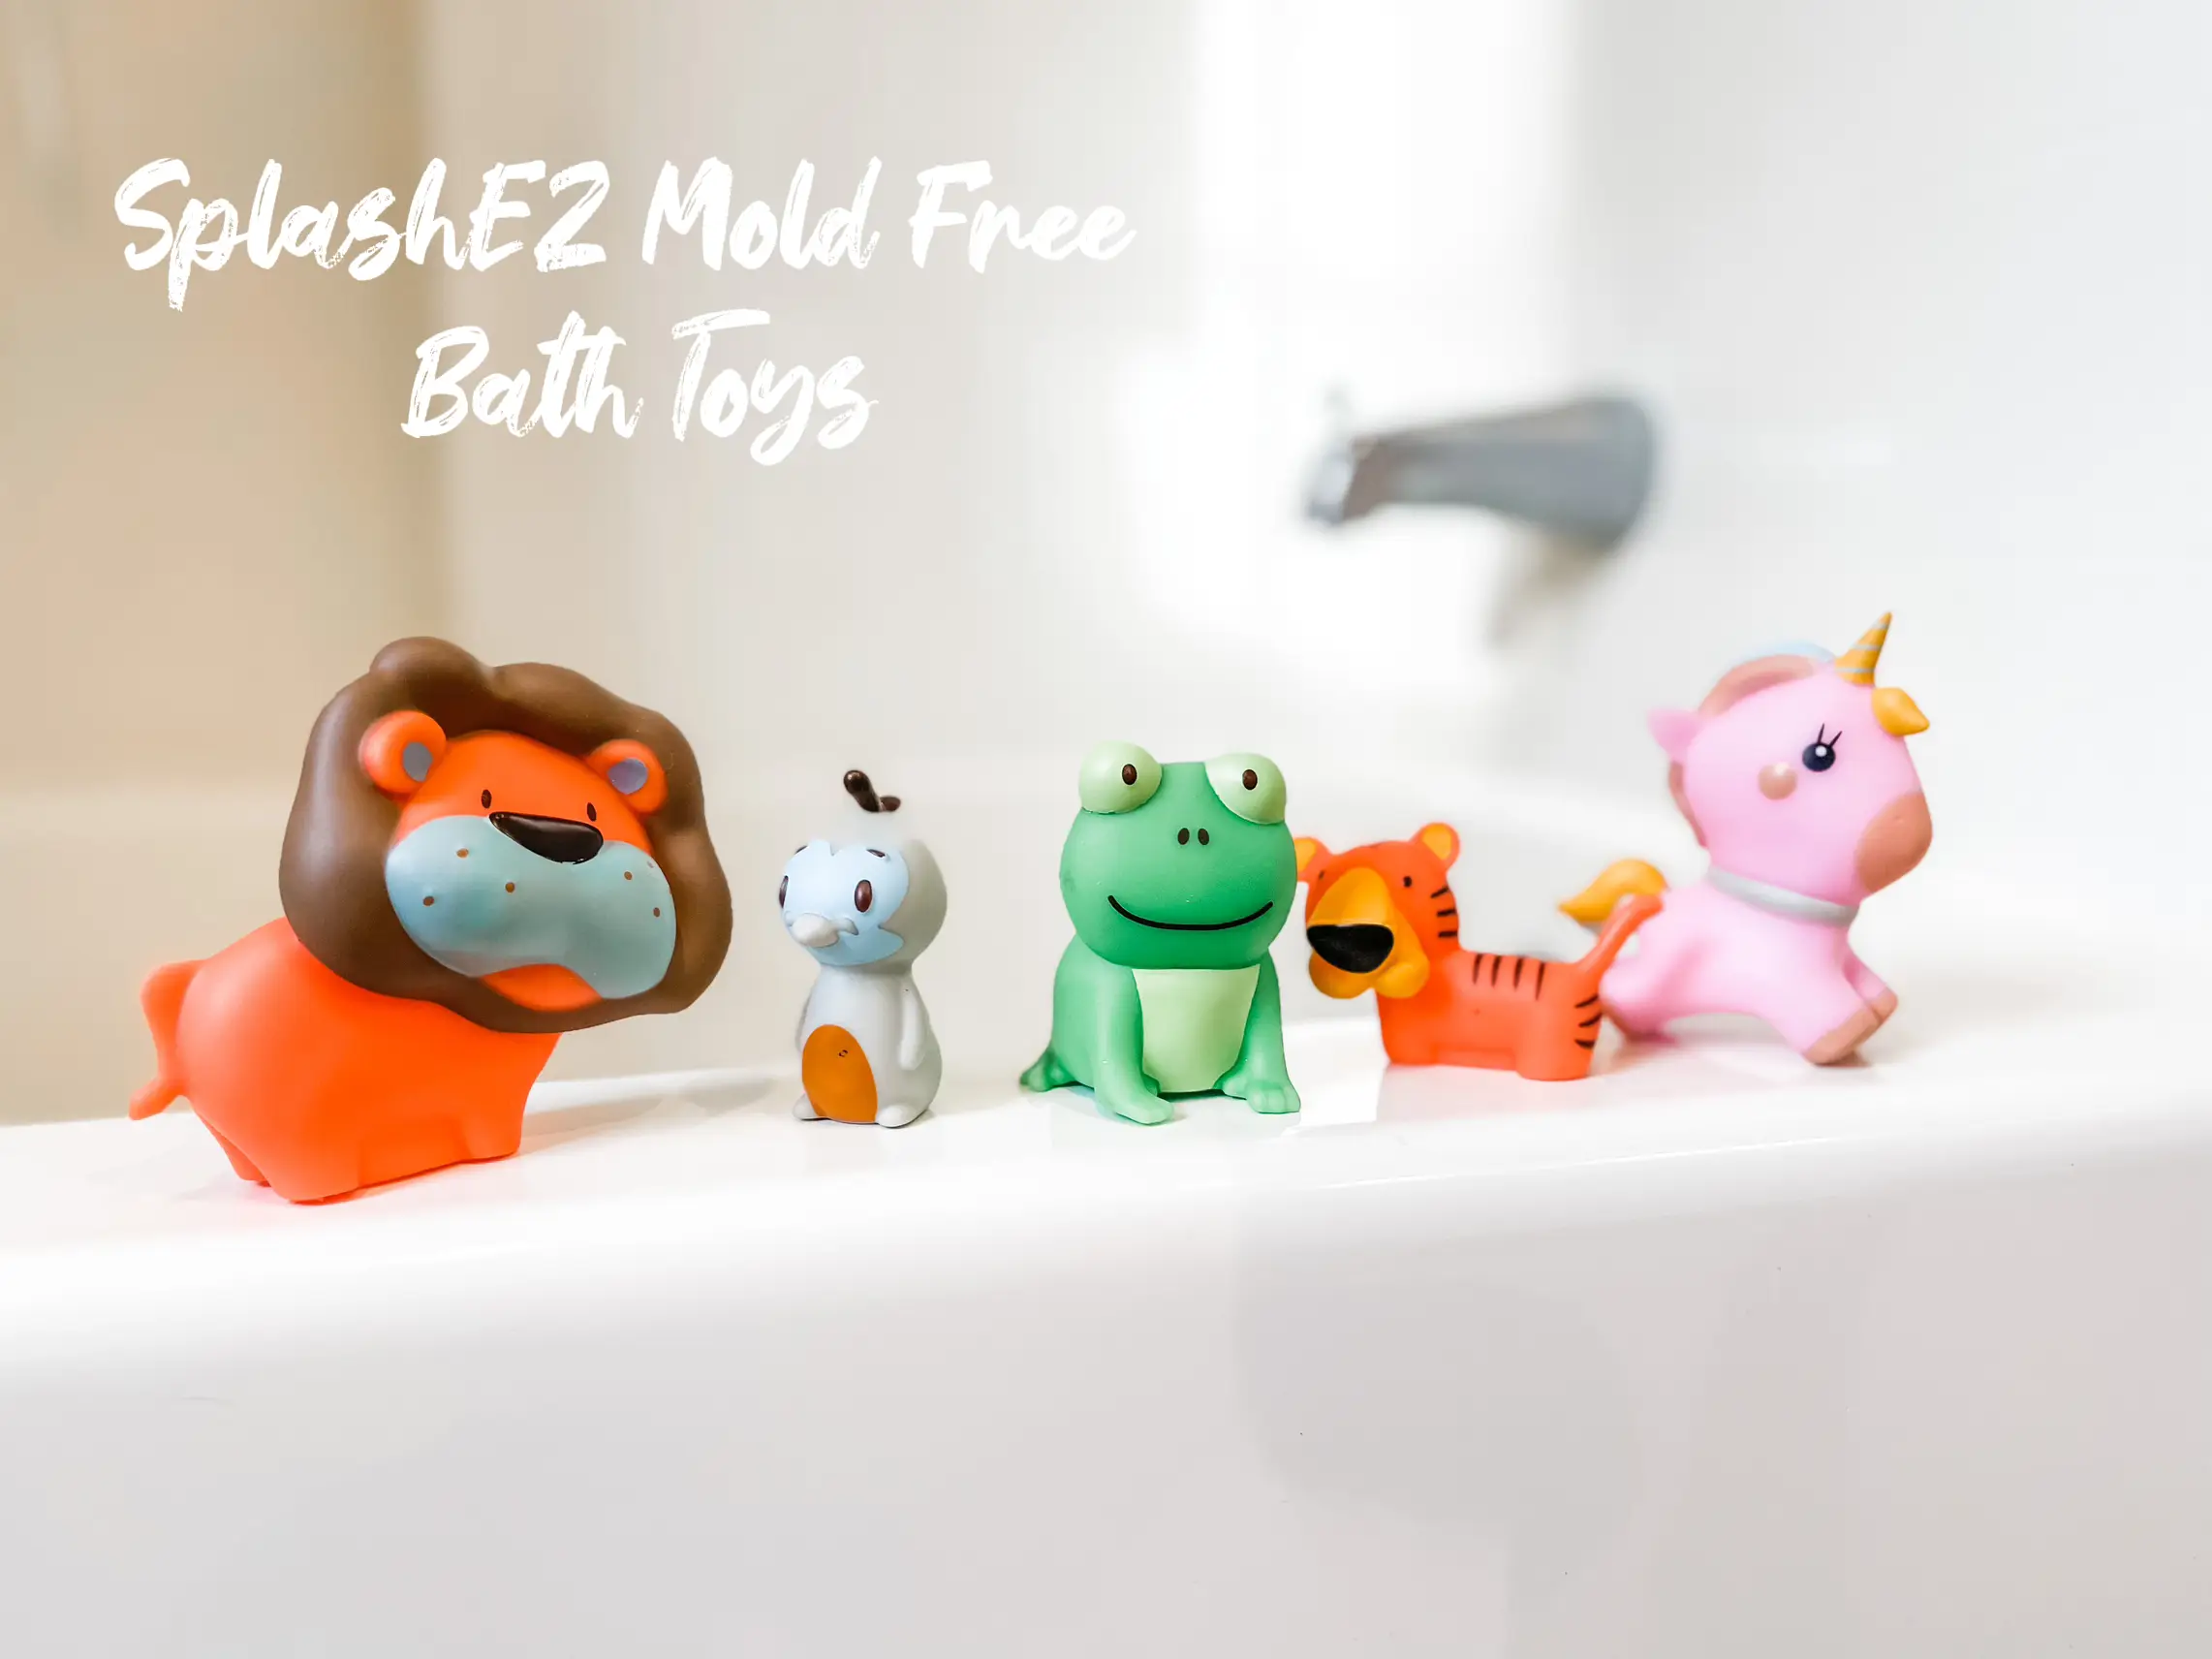 What You Need to Know About Mold & Bath Toys